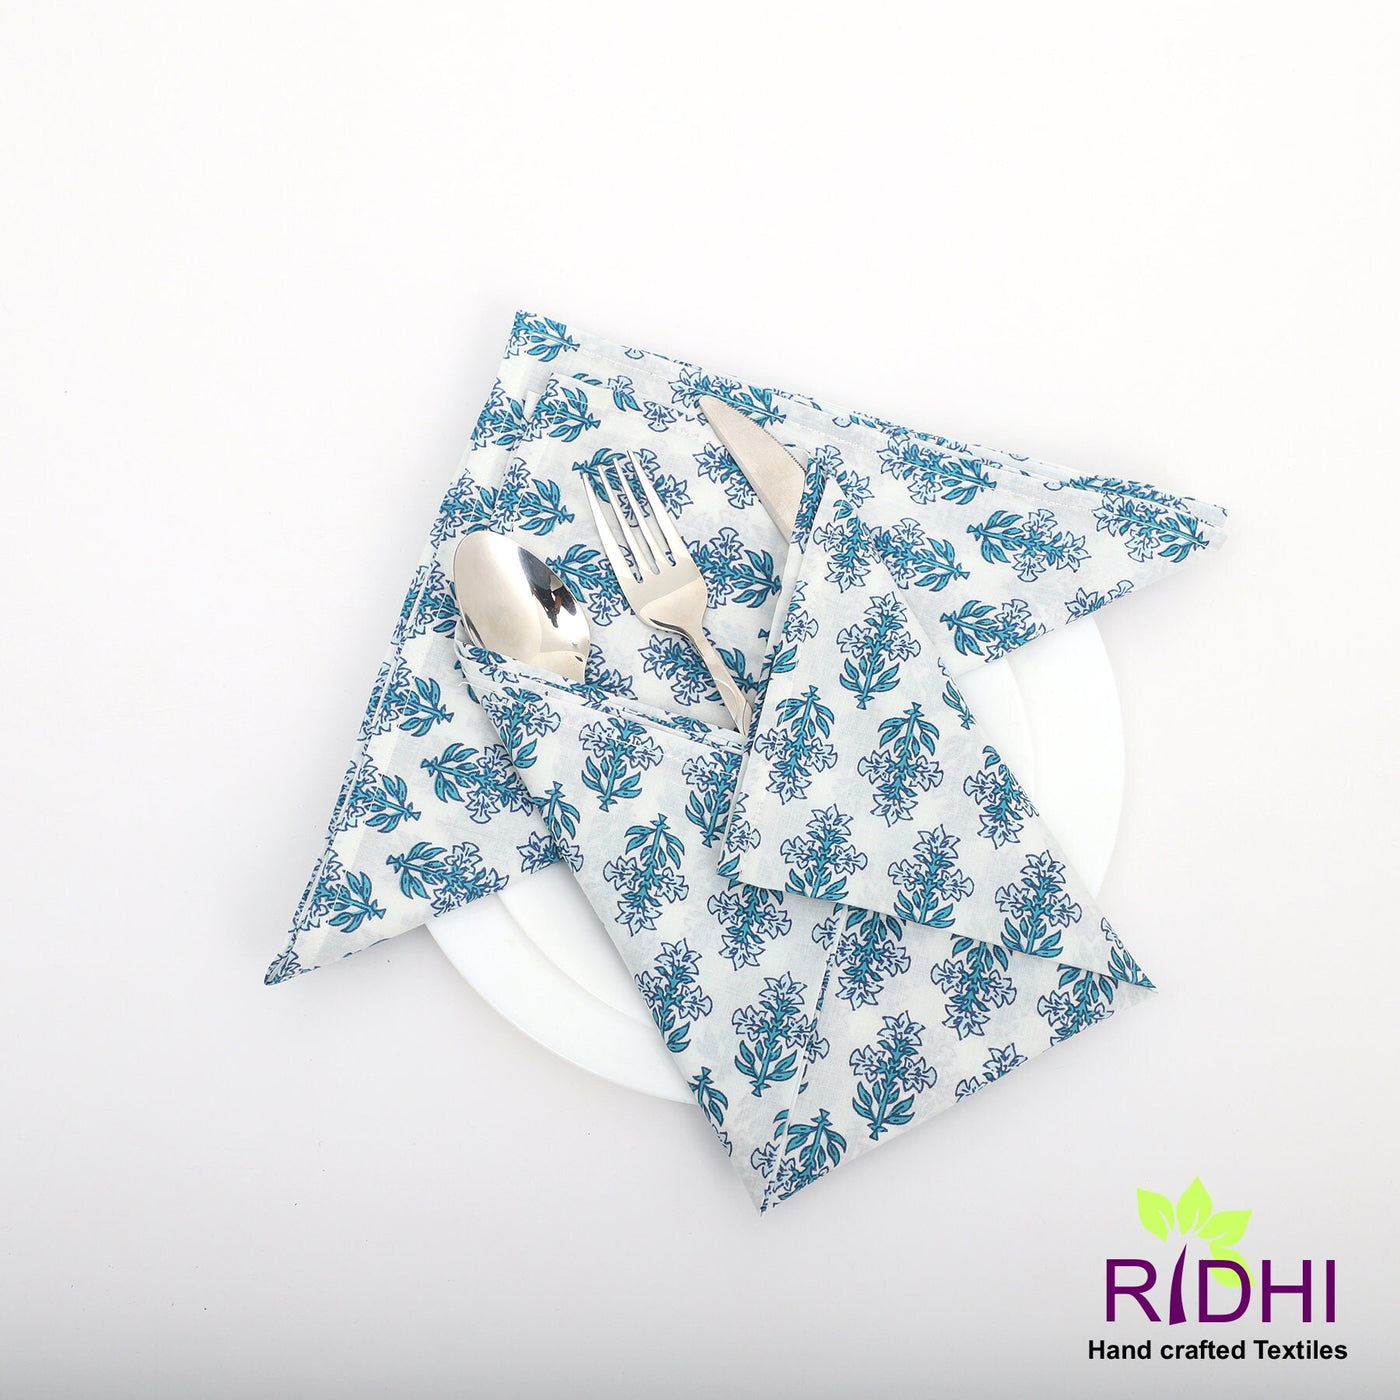 Powder and Ocean Blue Indian Floral Printed 100% Pure Cotton Cloth Napkins, Valentines Gift, 18x18"- Cocktail Napkins, 20x20"- Dinner Napkins